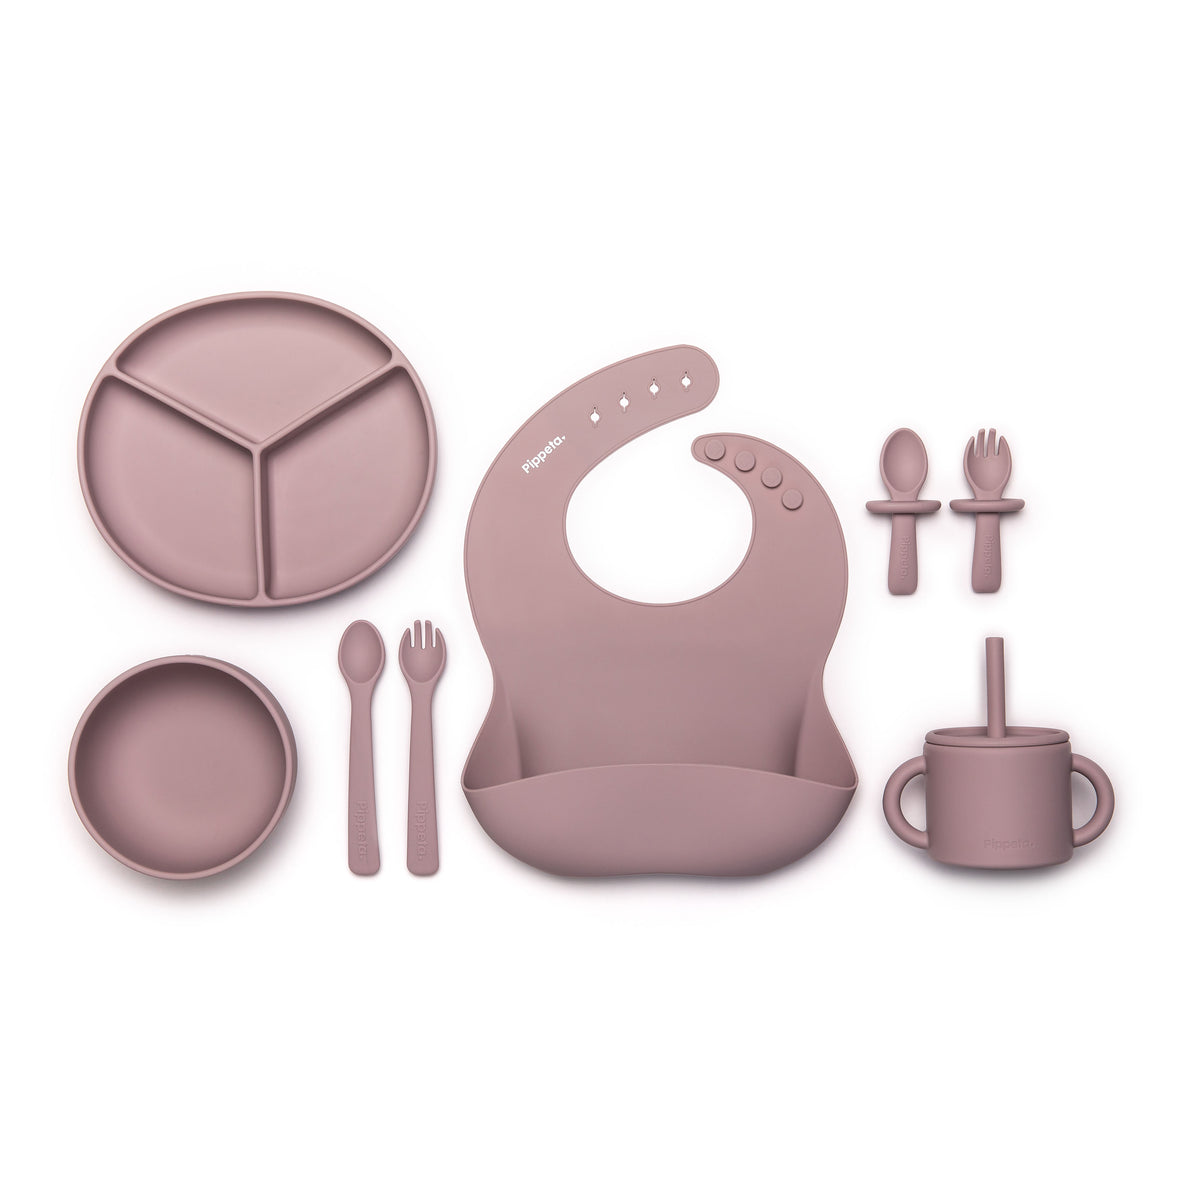 Pippeta Ultimate Weaning Set | Ash Lilac